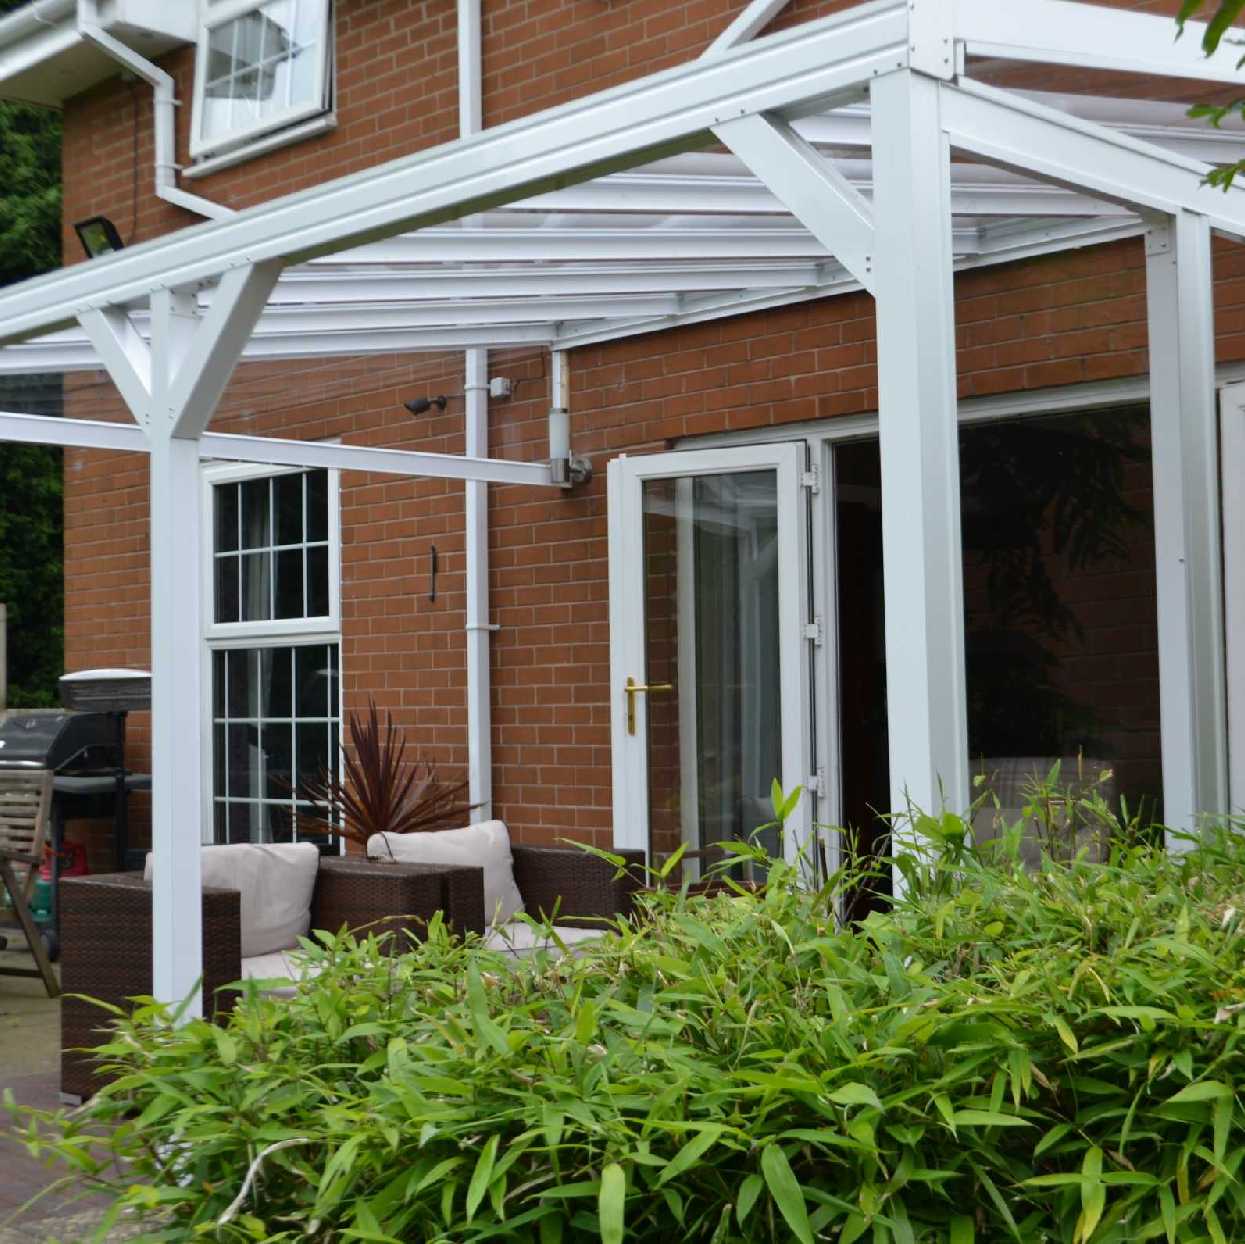 Omega Smart Lean-To Canopy, White with 6mm Glass Clear Plate Polycarbonate Glazing - 2.1m (W) x 3.5m (P), (2) Supporting Posts from Omega Build